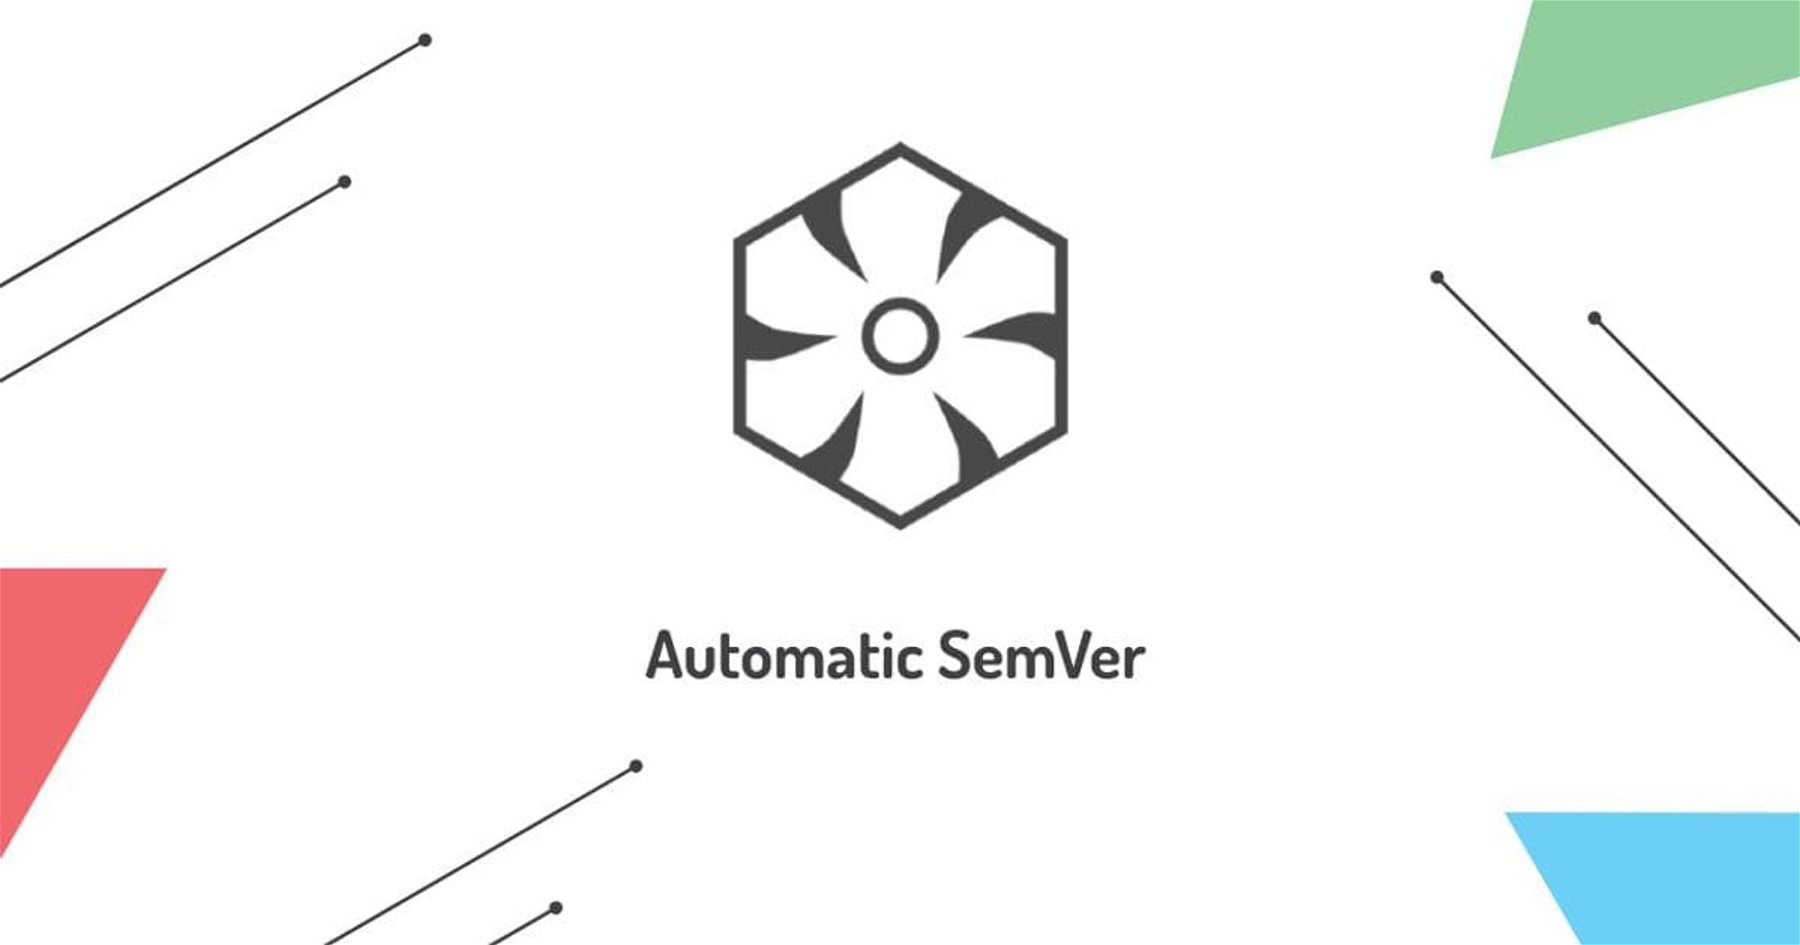 Semantic versioning and releasing made easy